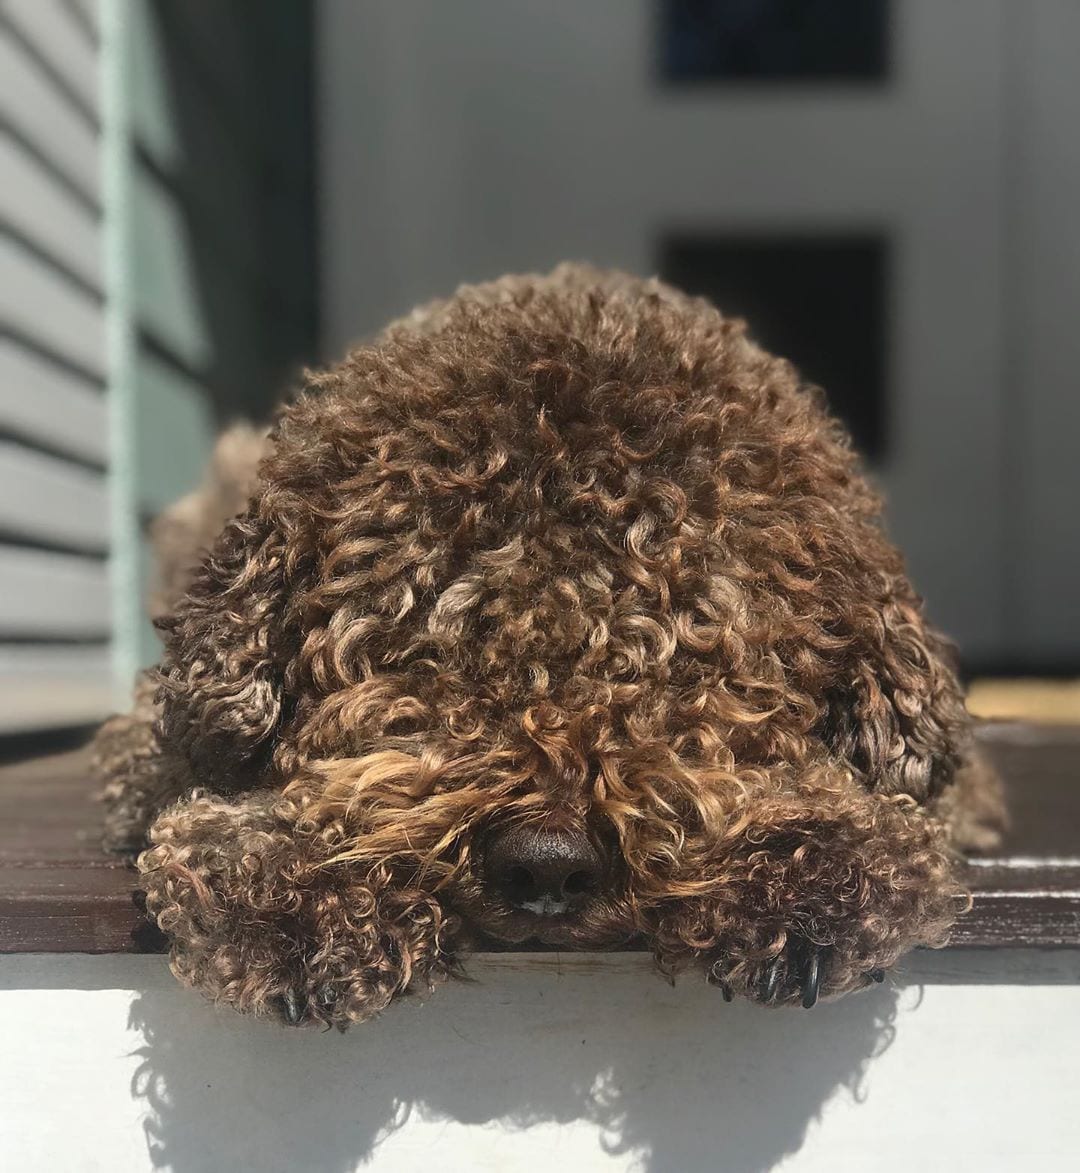 A brown Lagotto Romagnolo lying on the wooden floor in the front porch while under the sun